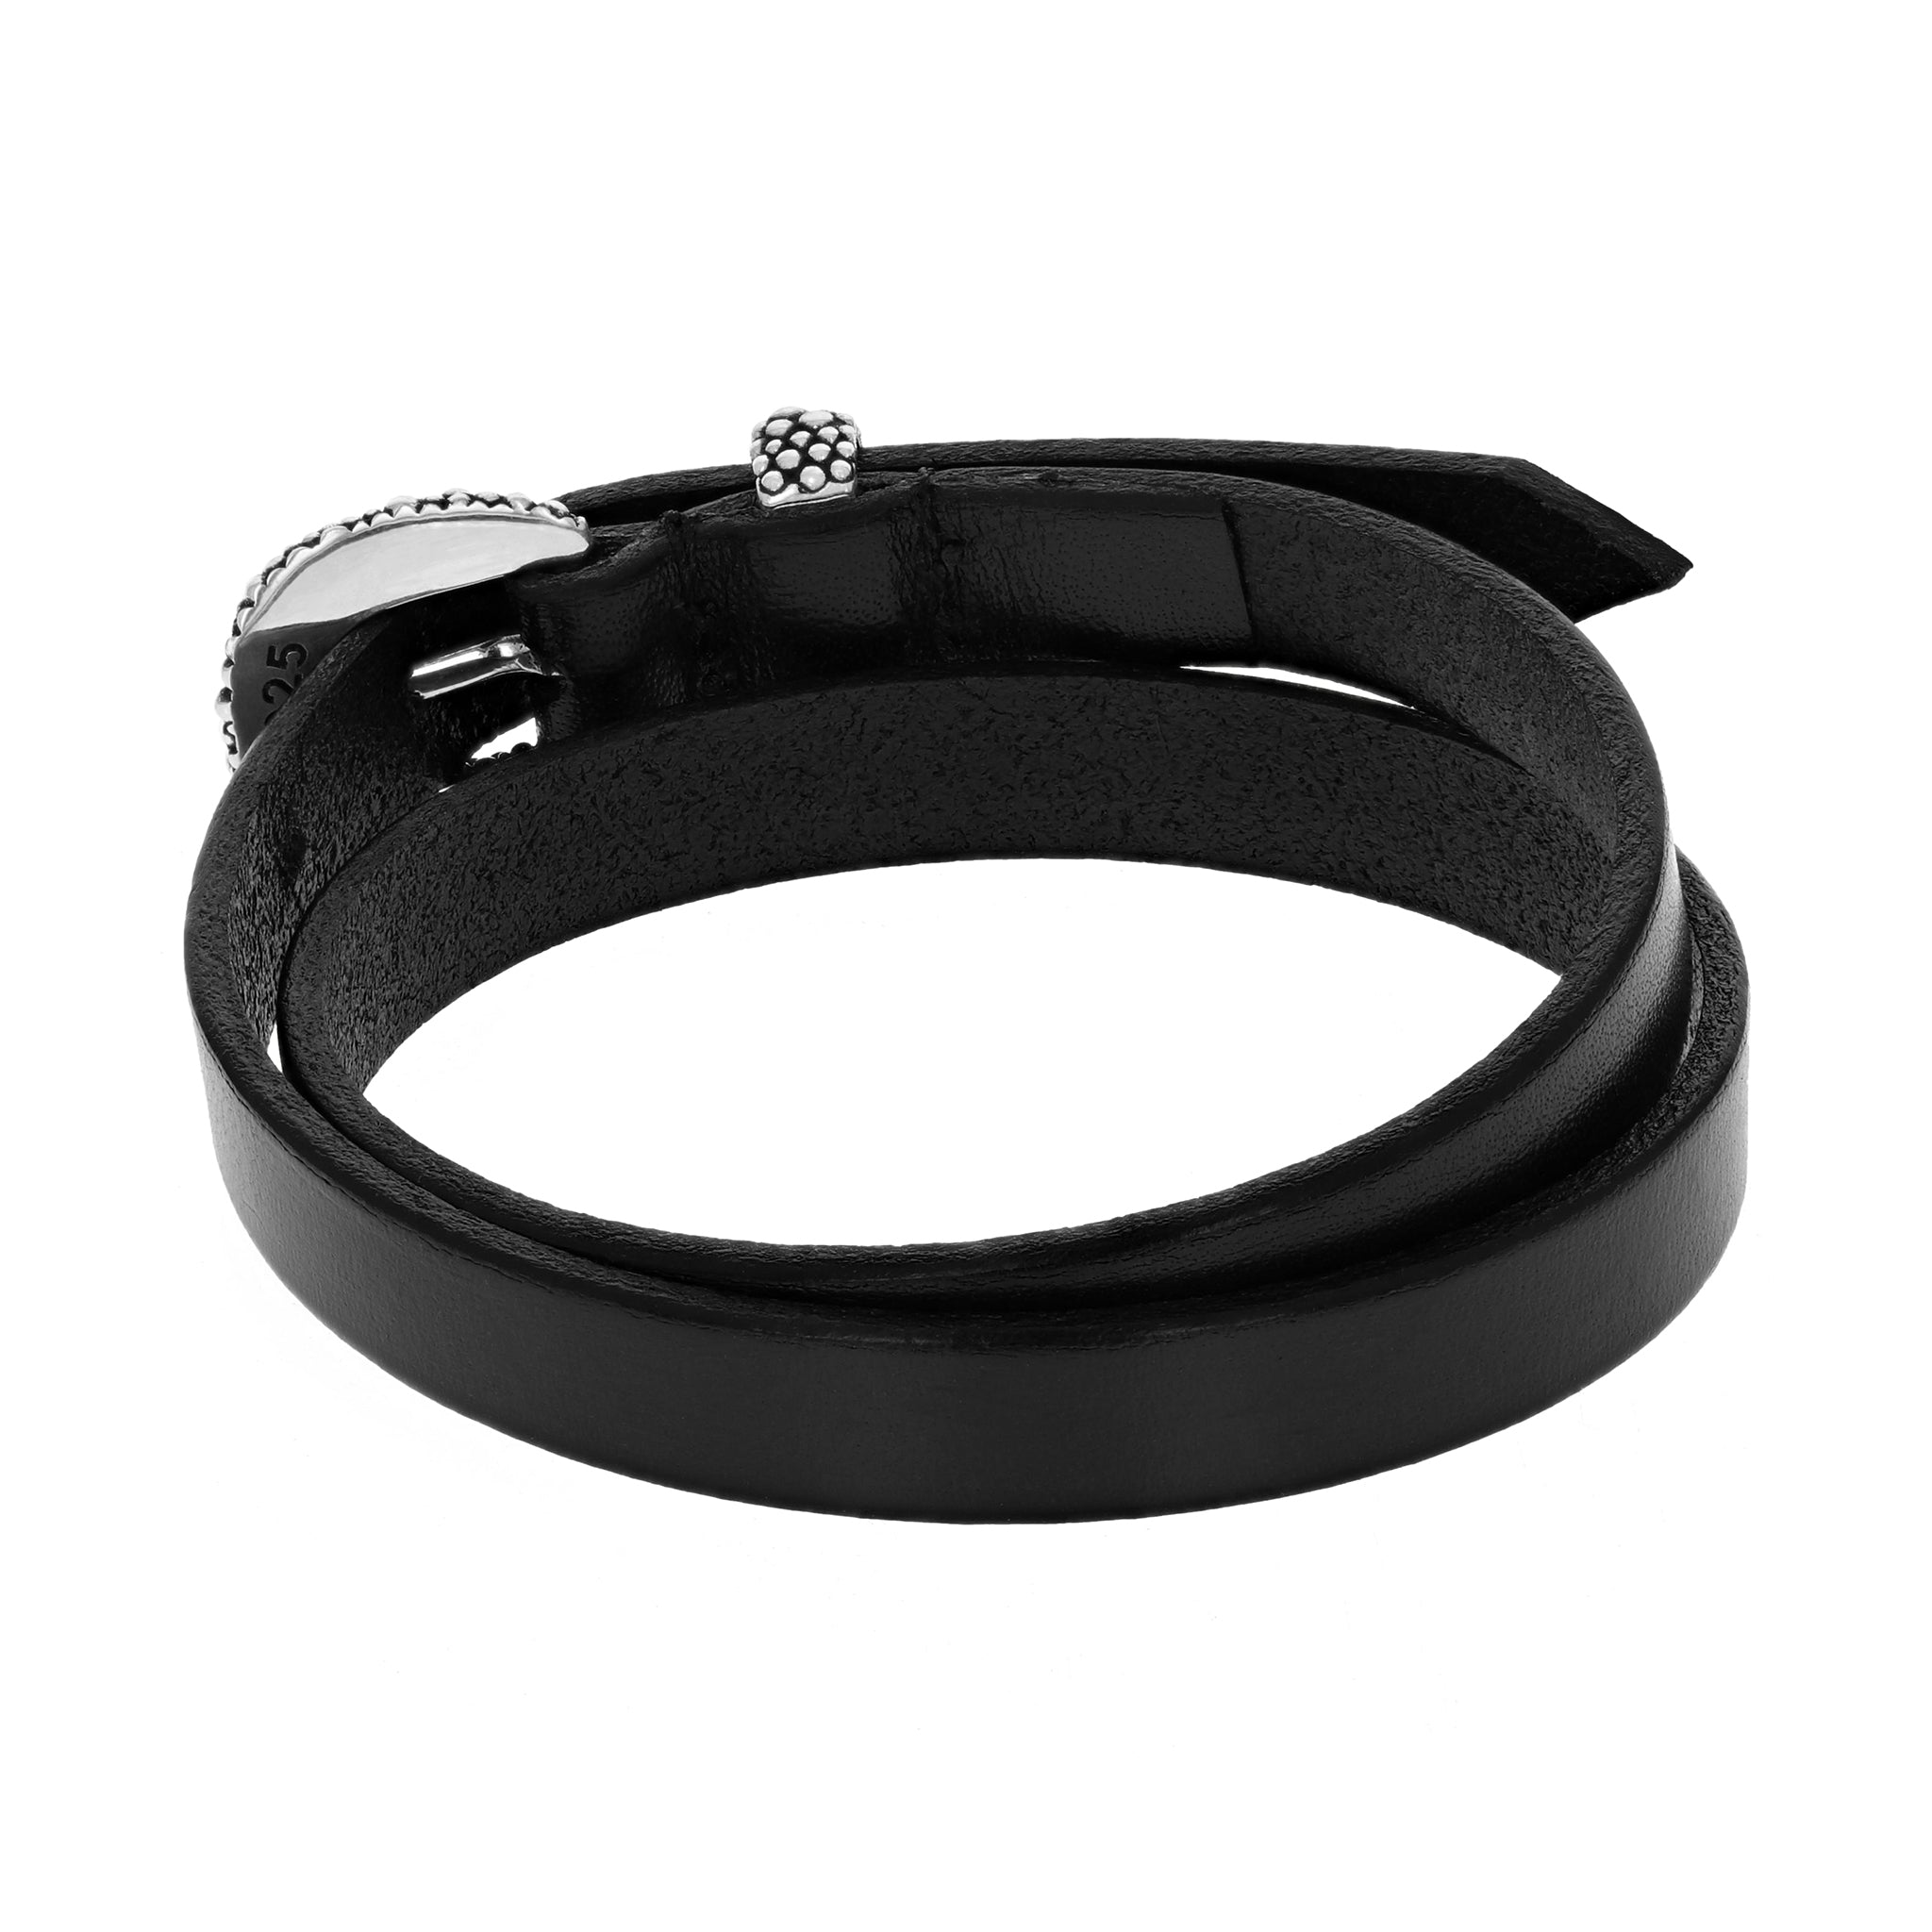 Back View of Black Double Wrap Leather Bracelet with Silver Stingray Texture Buckle and Keeper